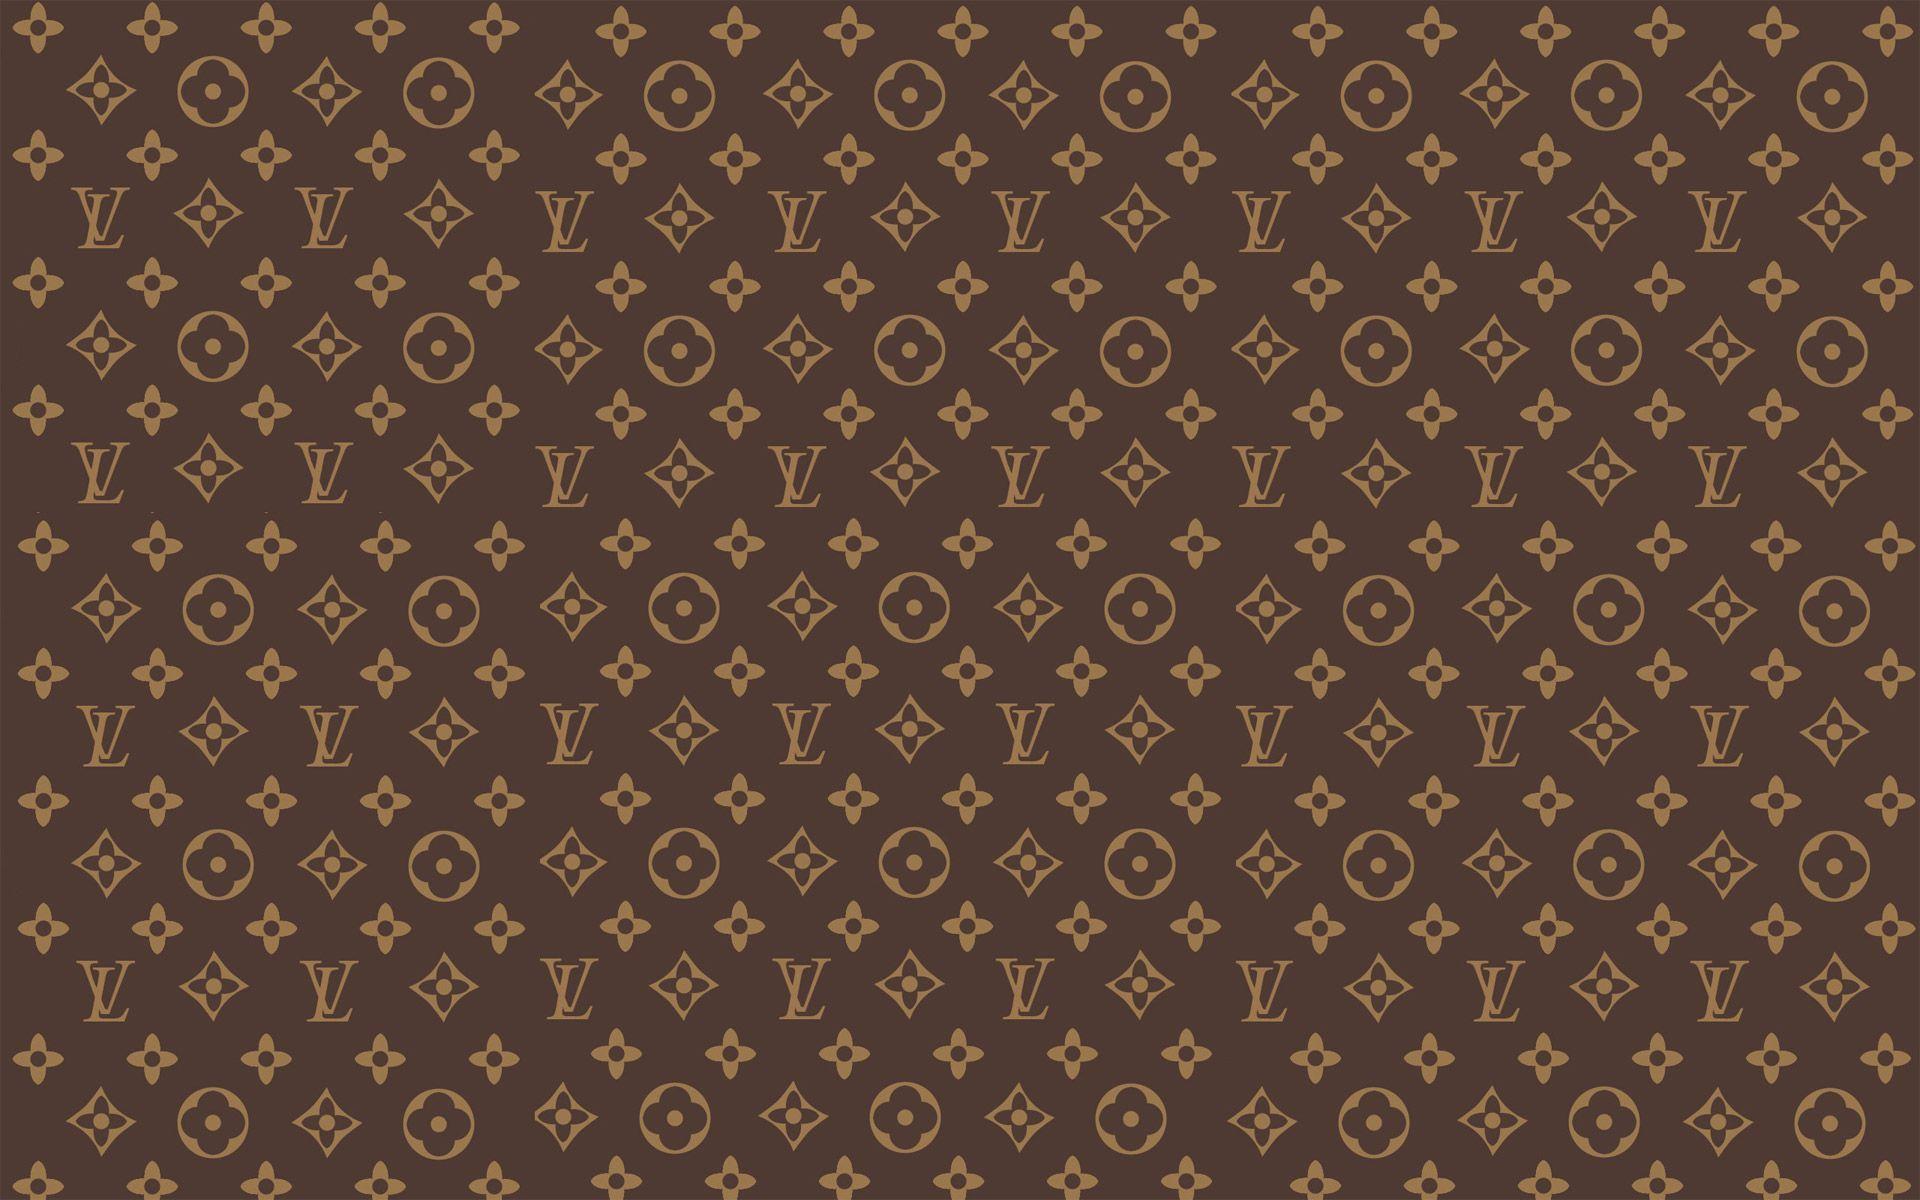 Louis Vuitton kitty wallpaper by Amy11_official - Download on